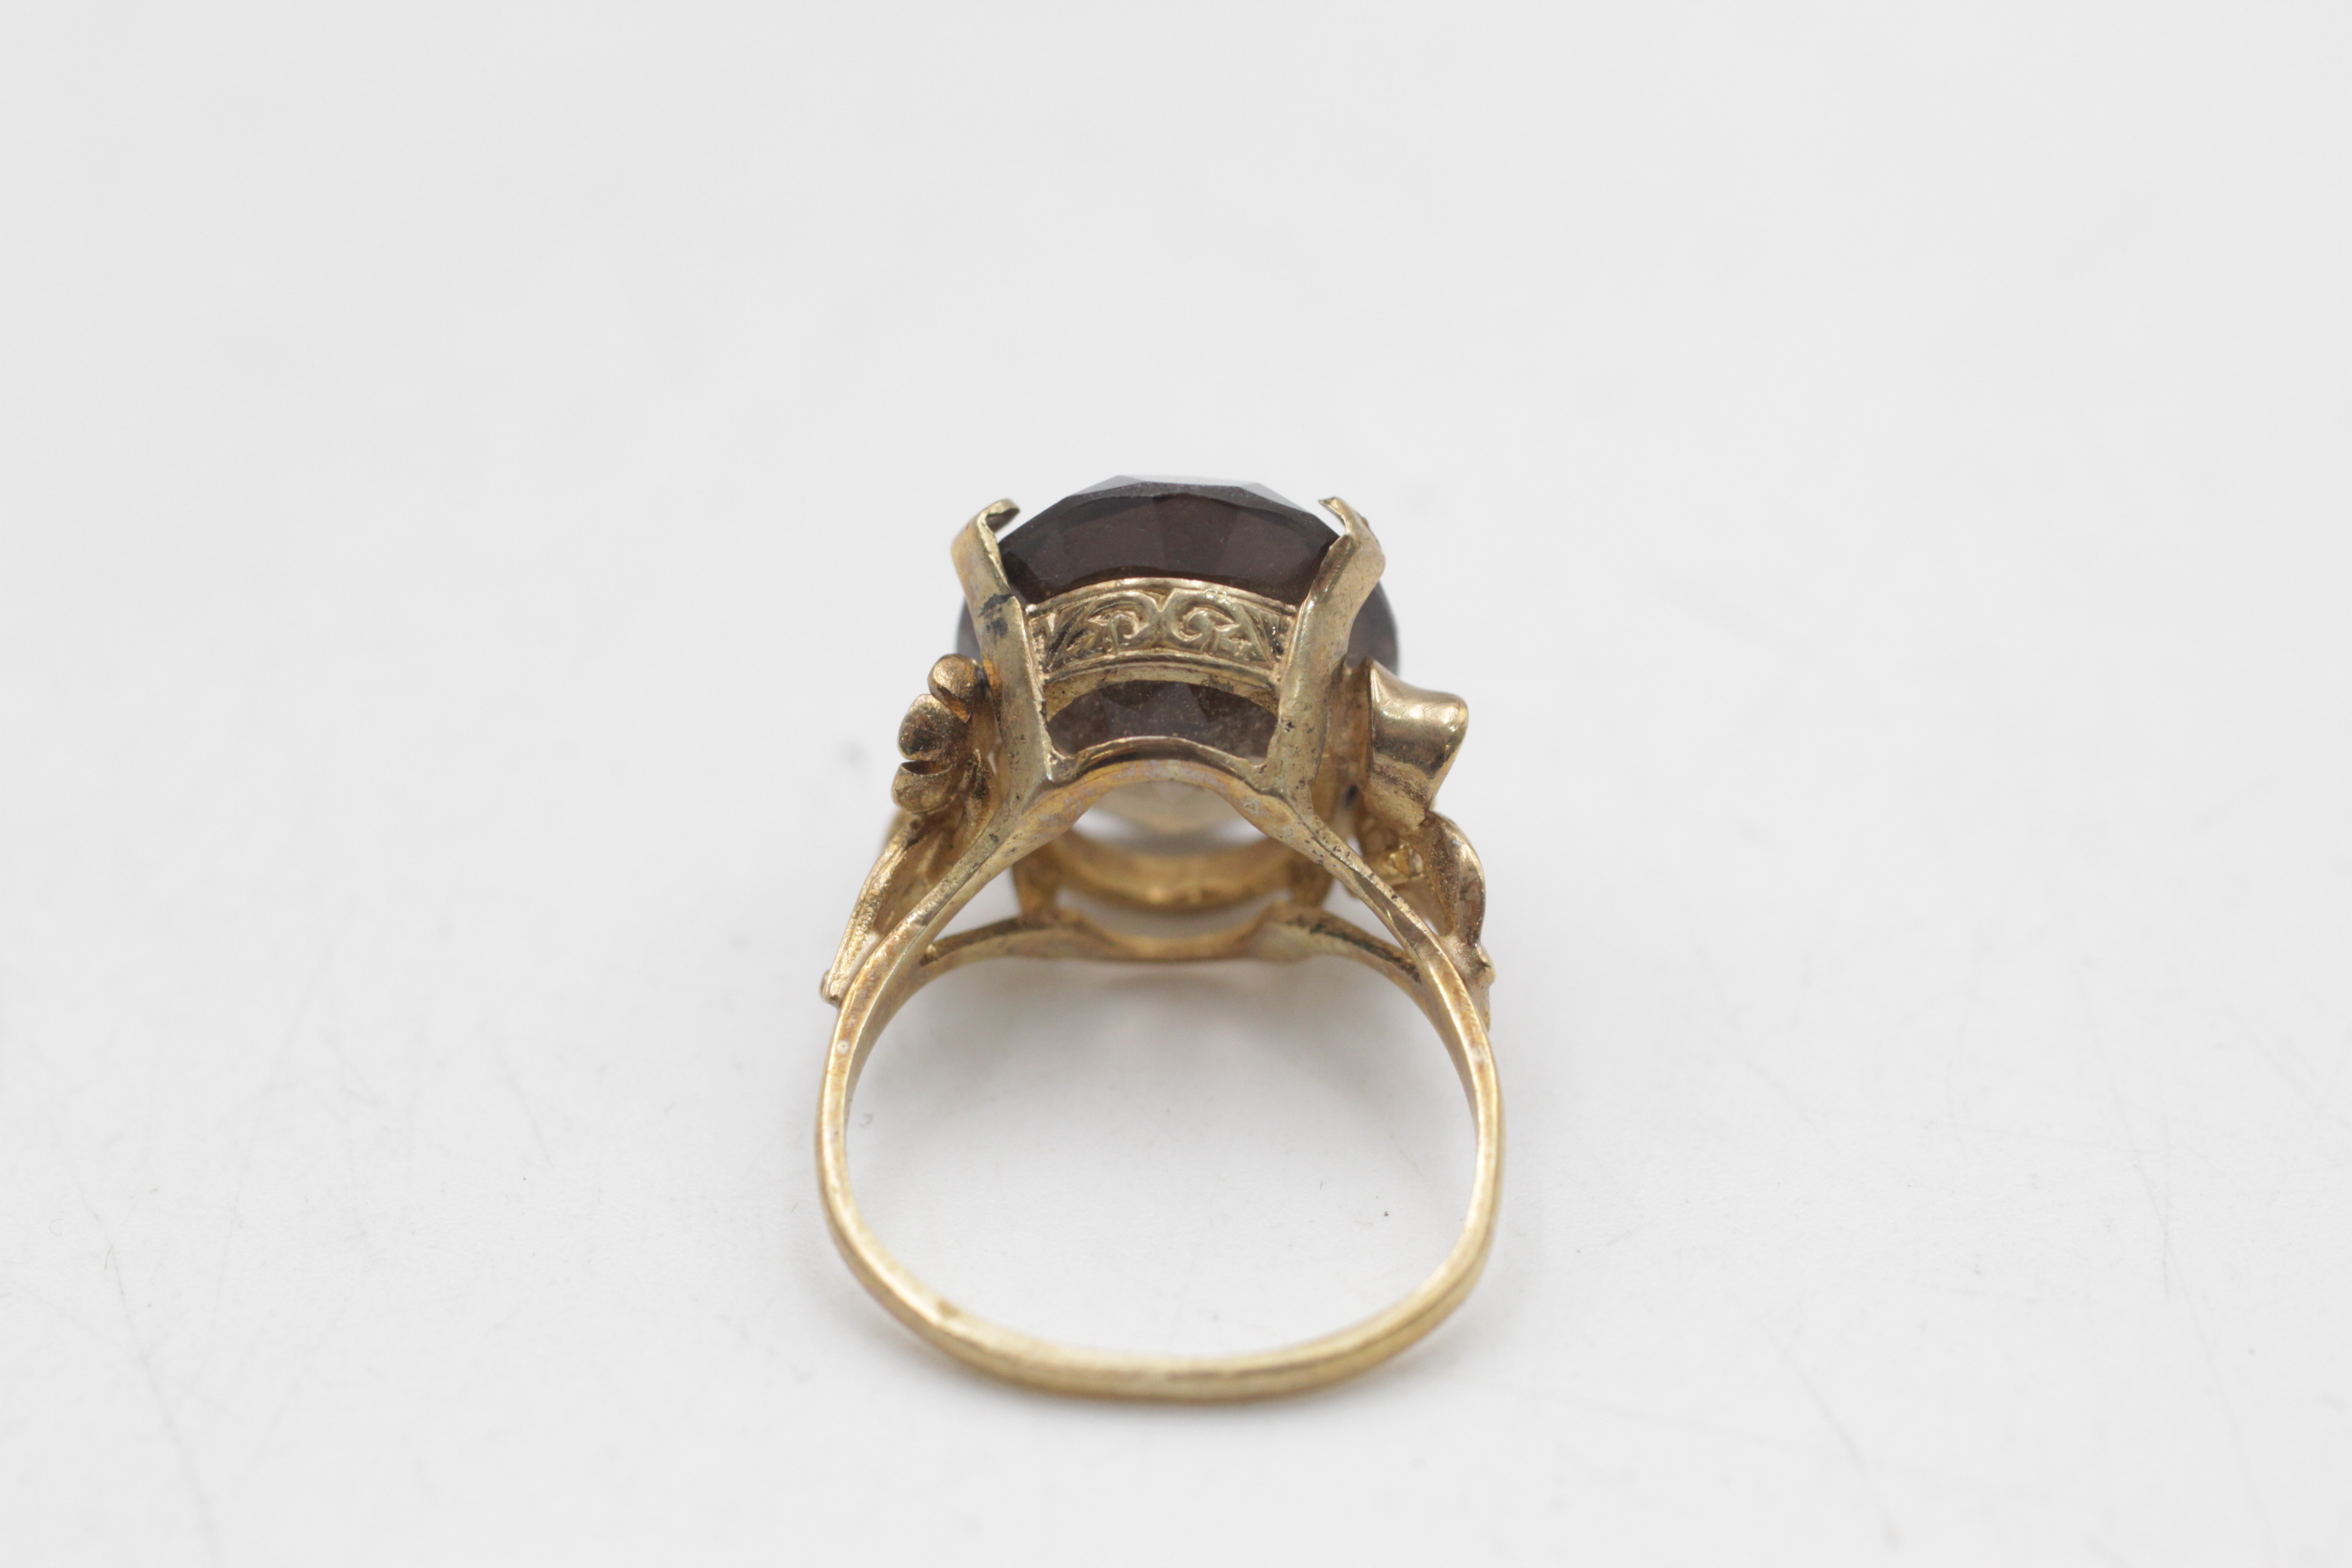 9ct gold vintage smoky quartz solitaire ornate floral setting cocktail ring (5.5g) - Image 3 of 5